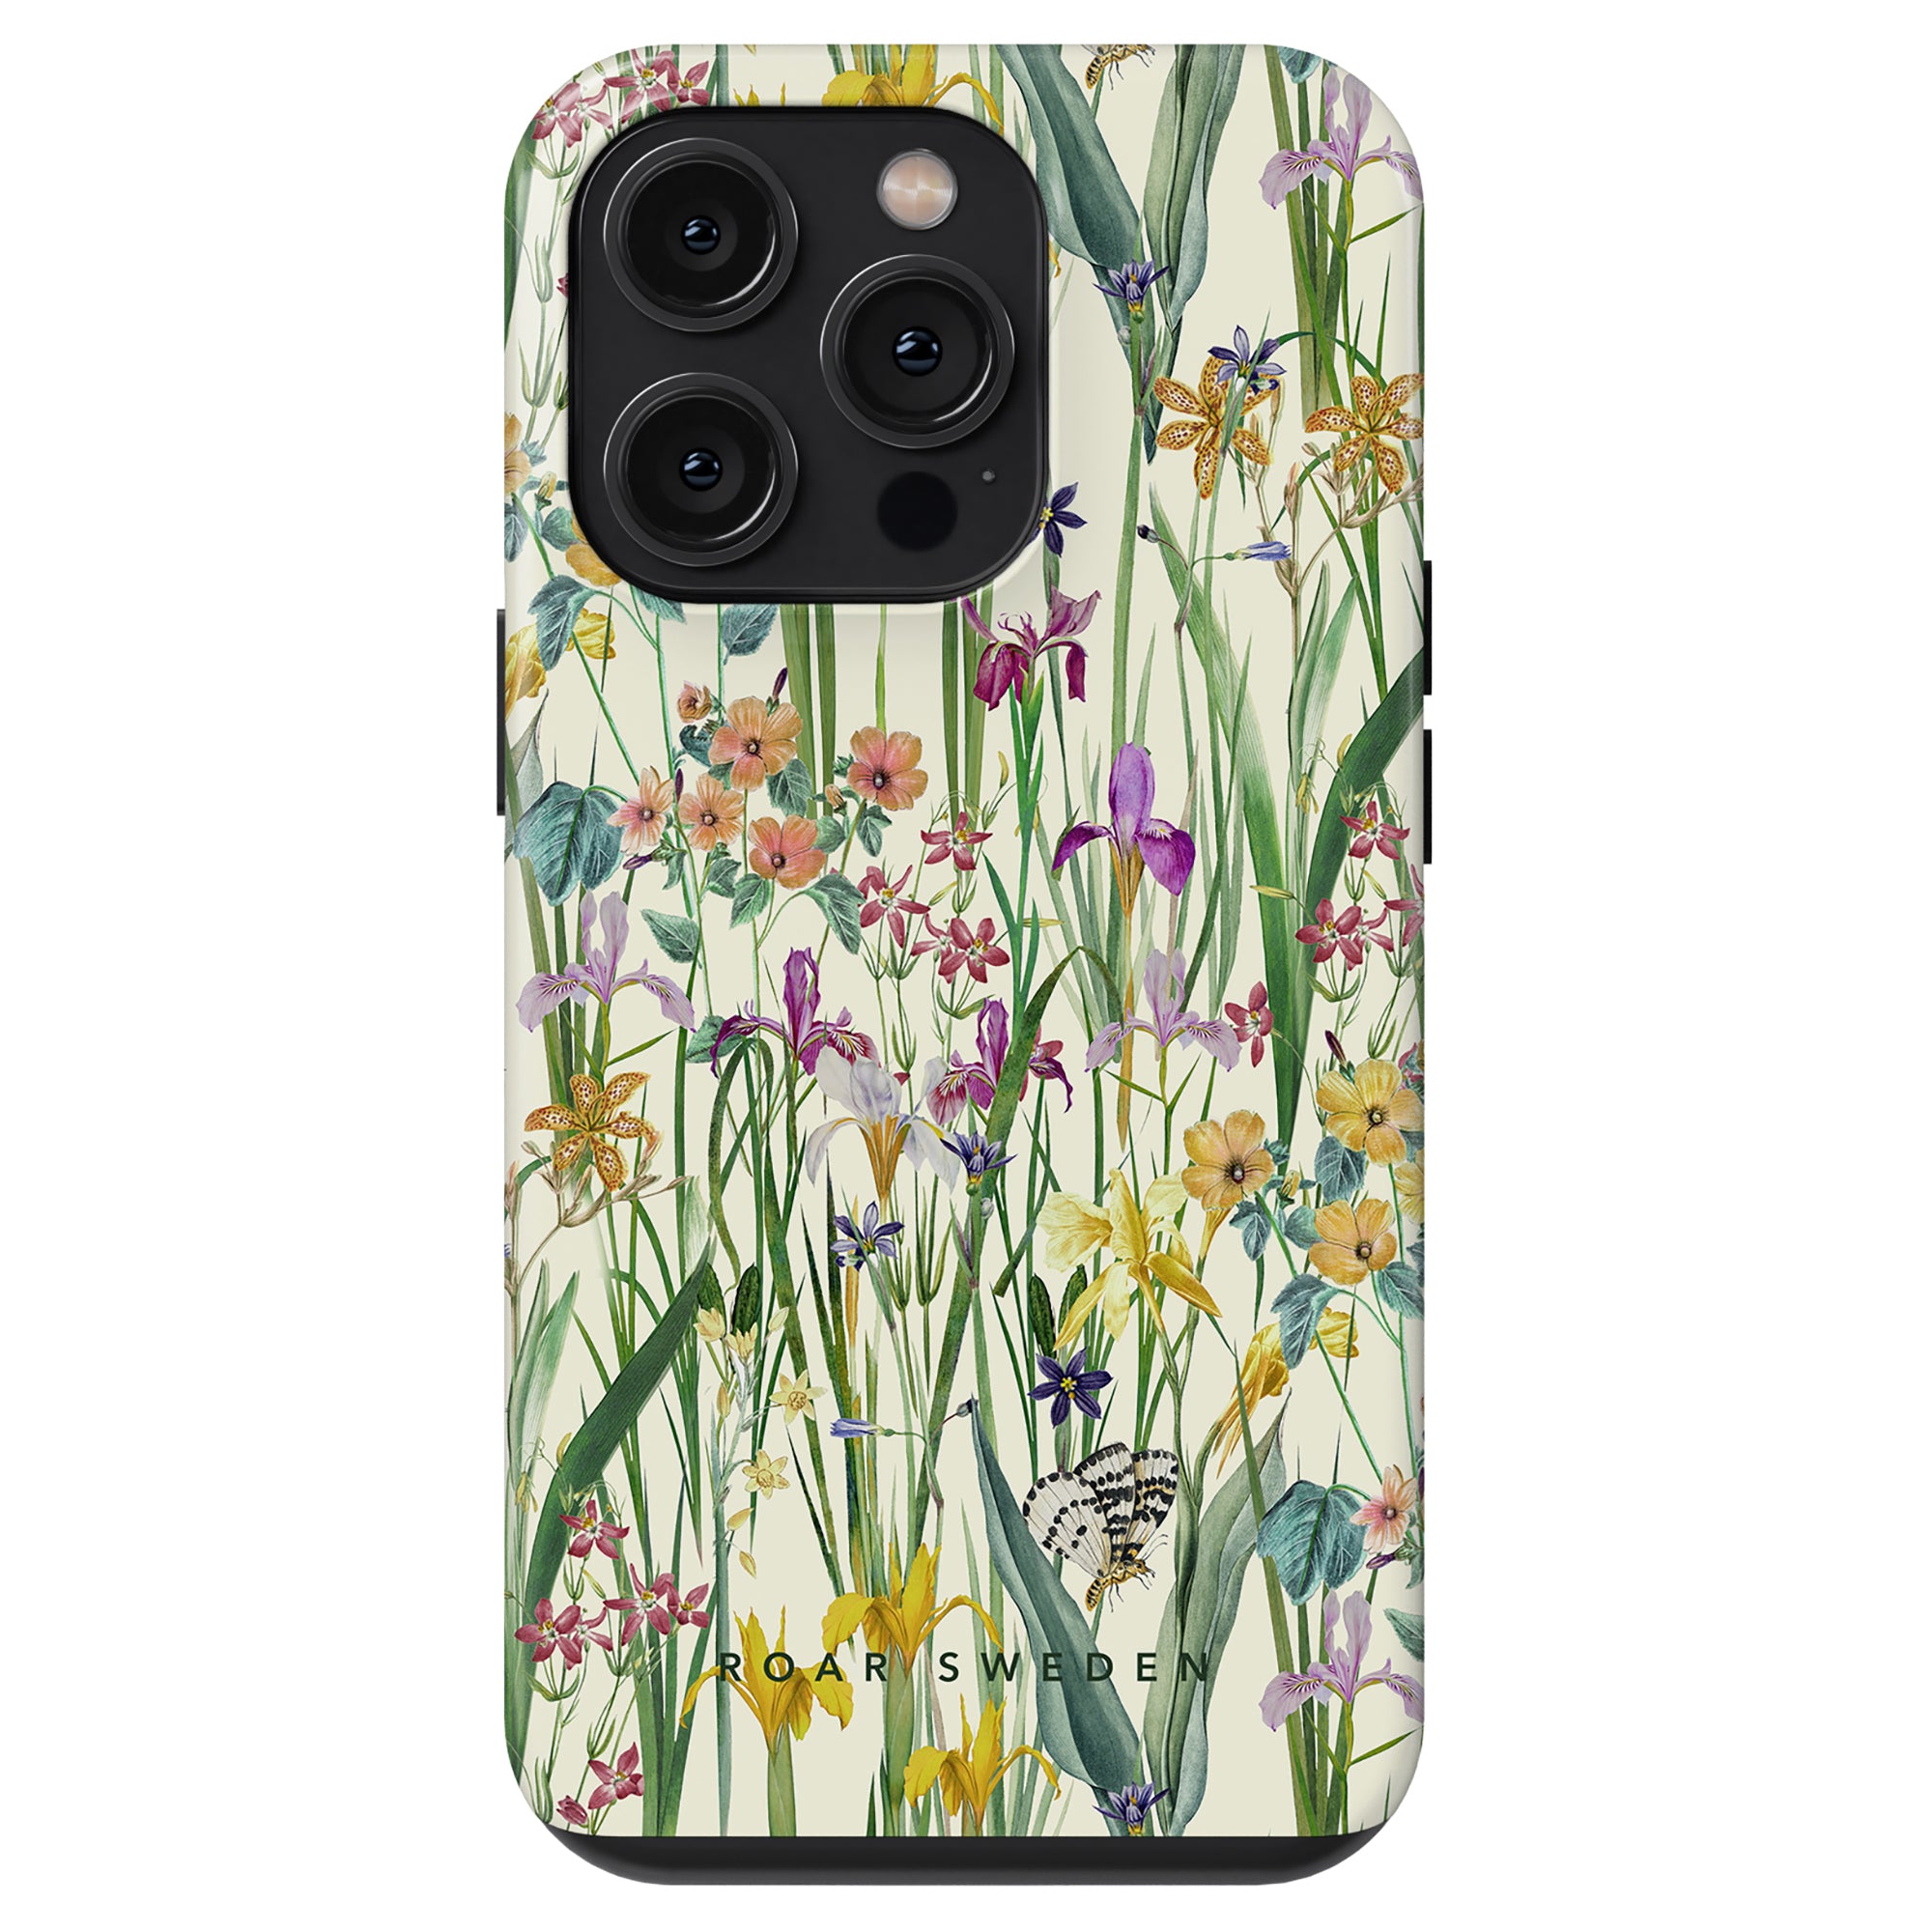 Blooming Meadow - Tough Case with cushioned support for a model with dual-lens camera.